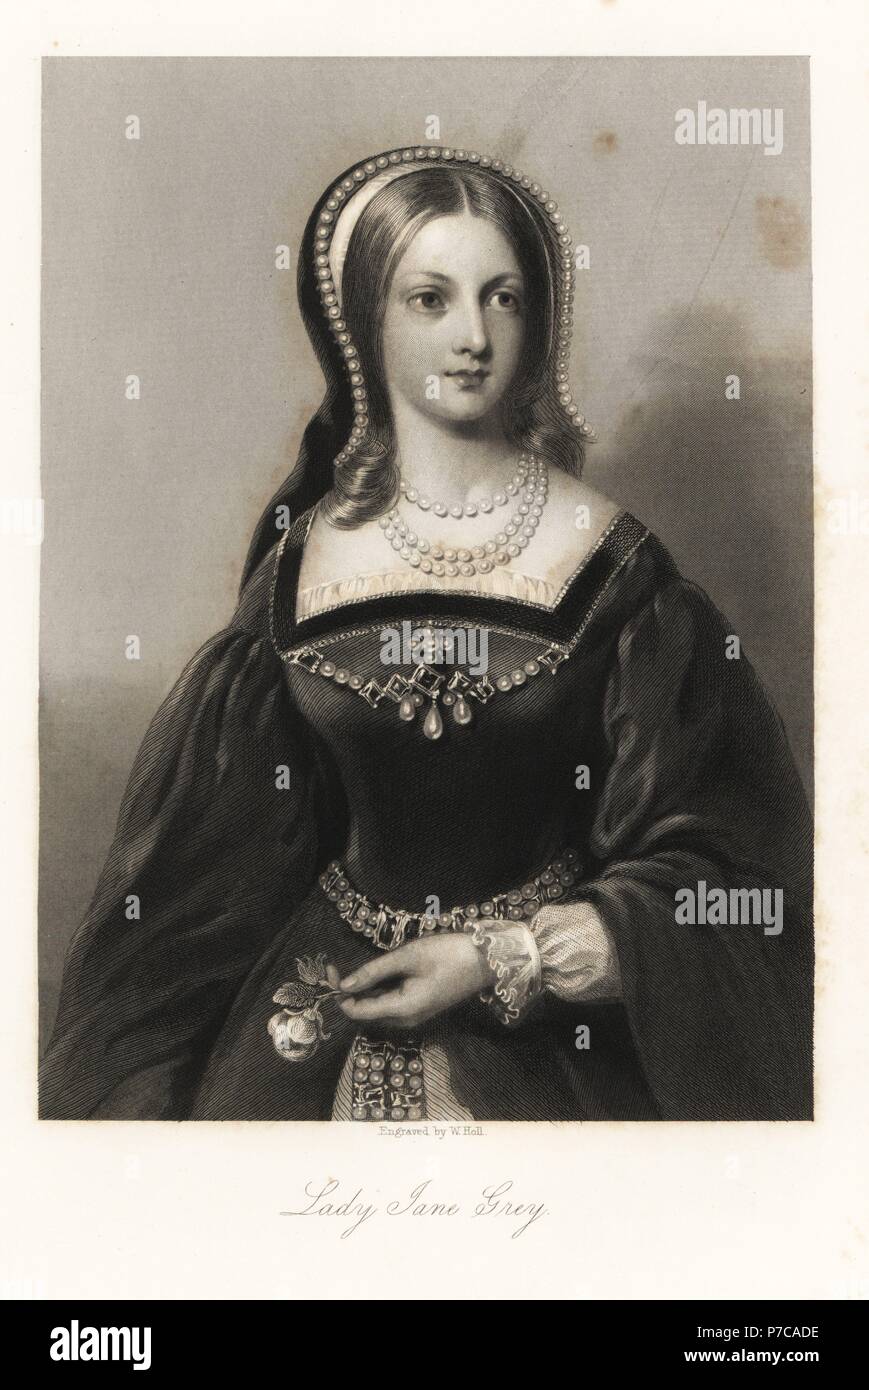 Lady Jane Grey, the Nine Days Queen of England. Steel engraving by William Holl from Mary Howitt's Biographical Sketches of The Queens of England, Virtue, London, 1868. Stock Photo